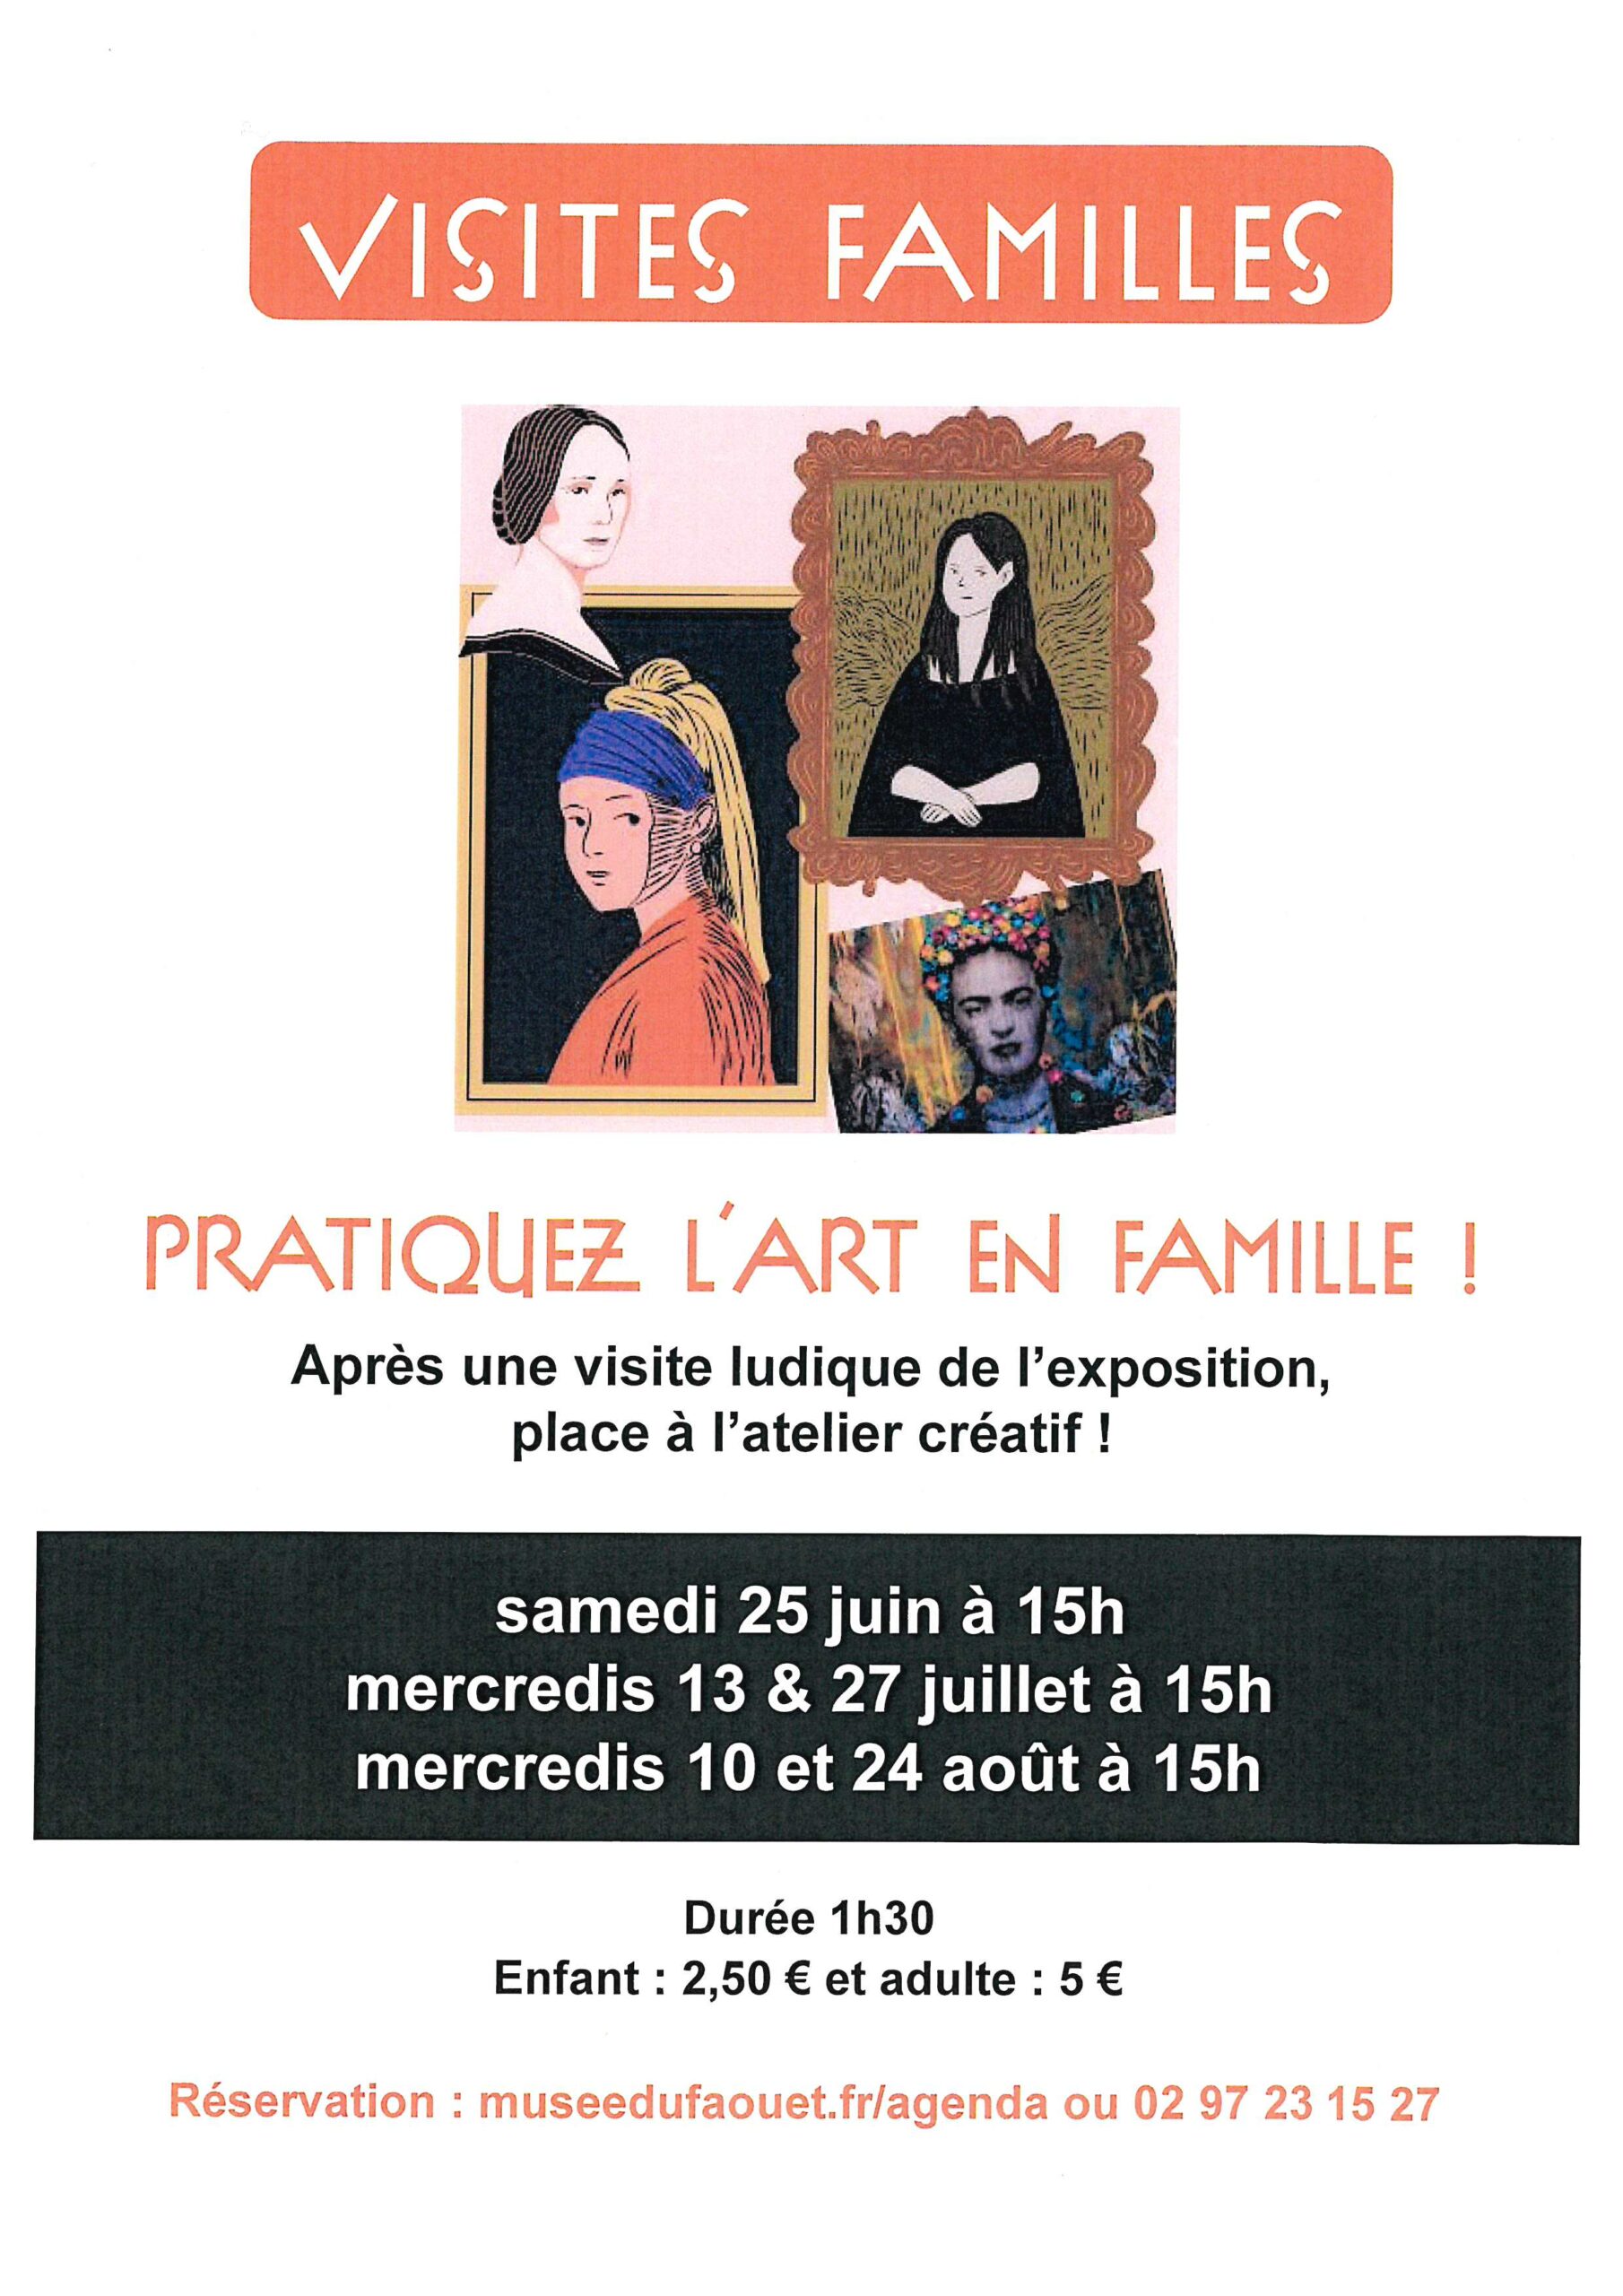 VISITES FAMILLE – MUSEE DU FAOUET